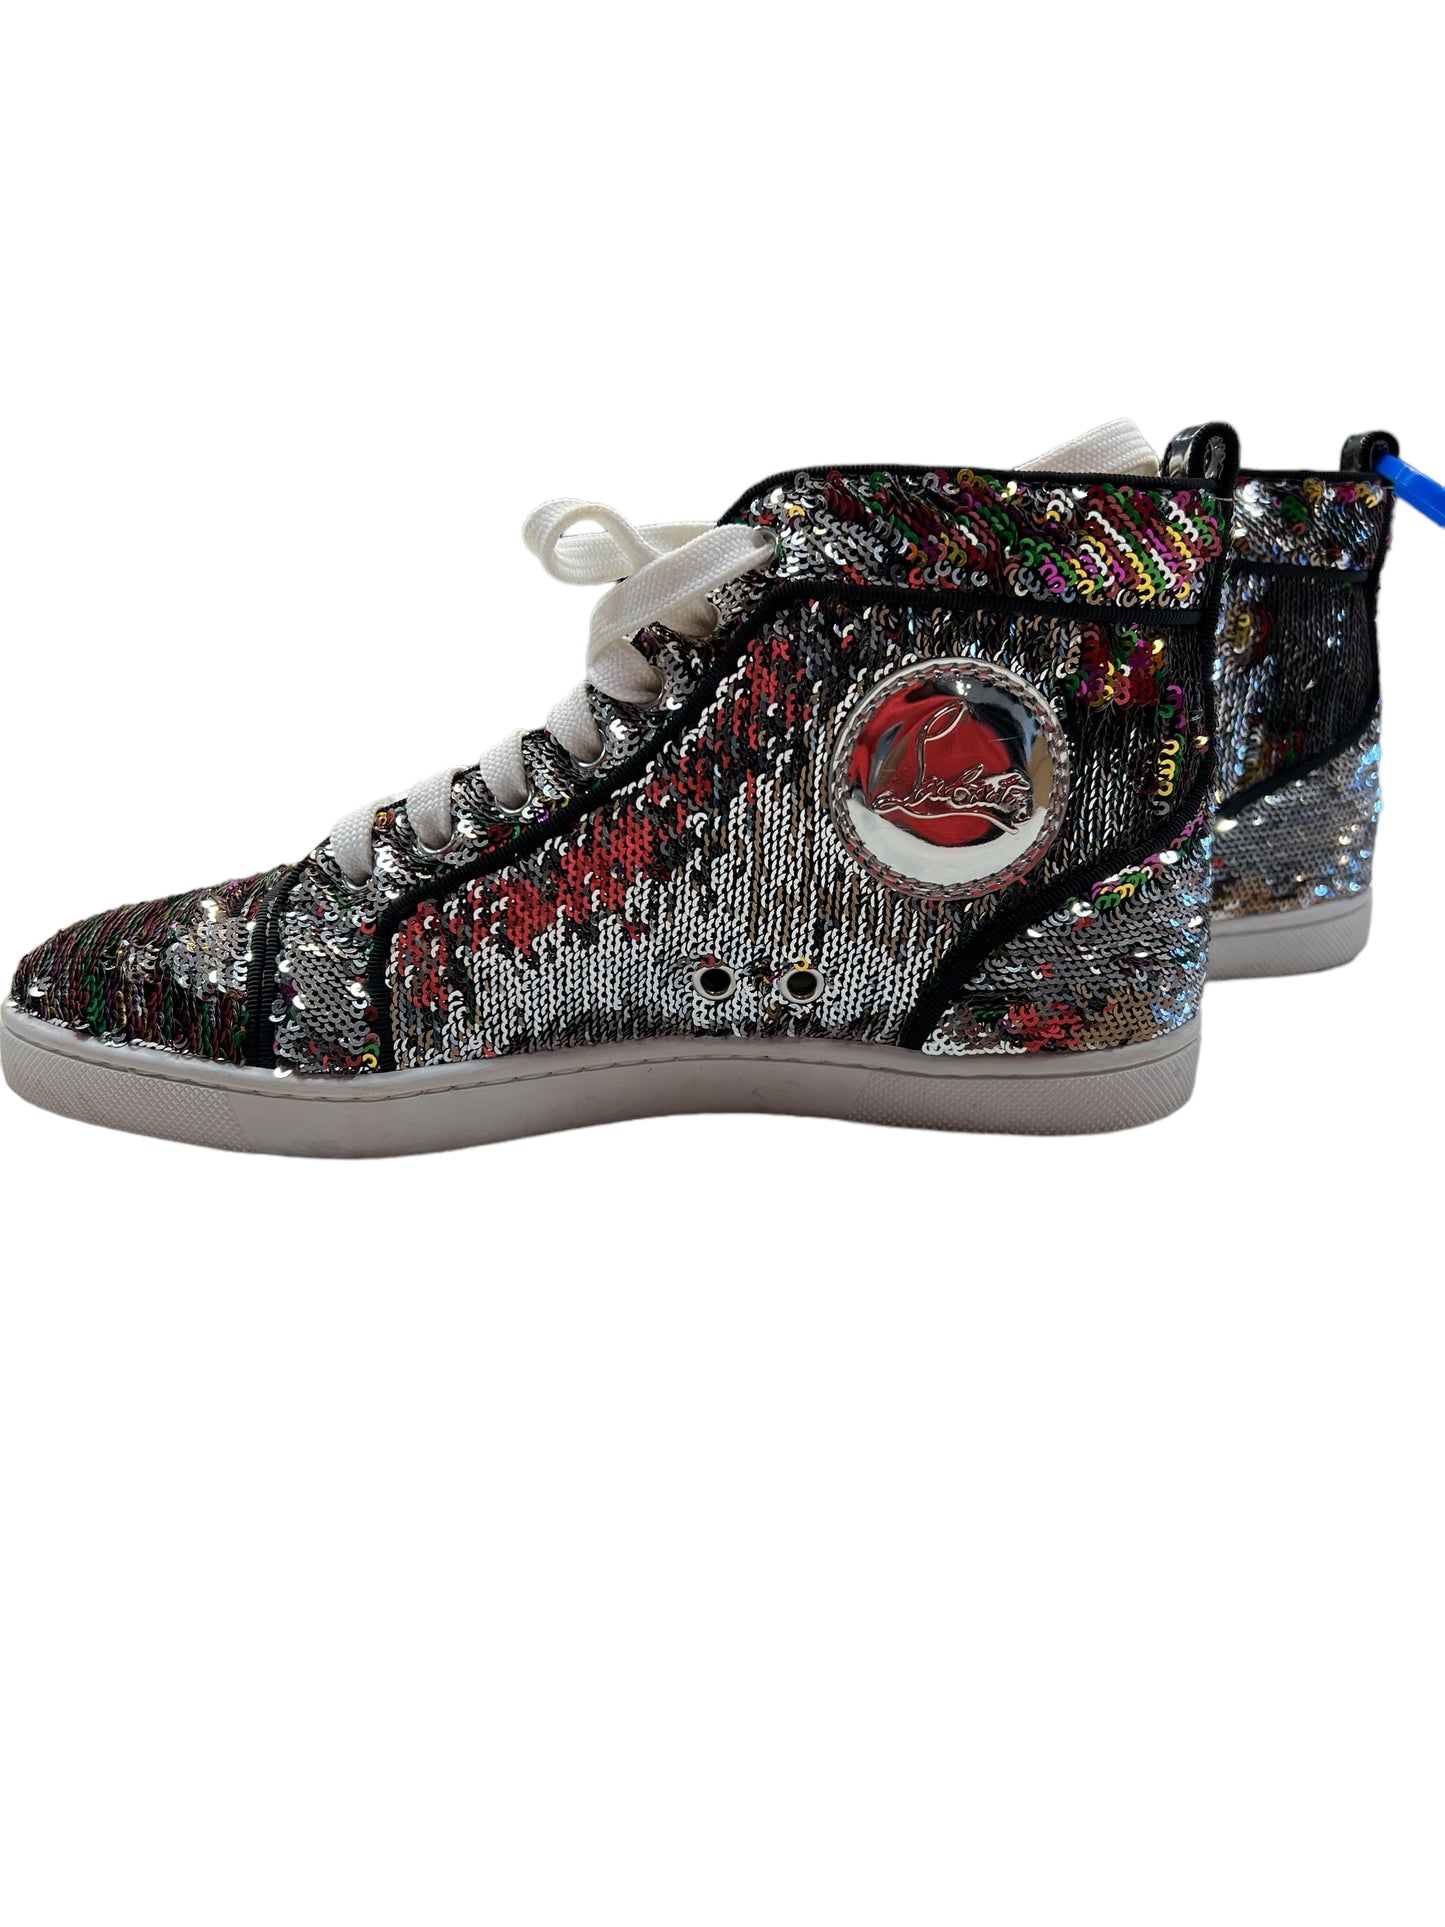 Shoes Luxury Designer By Christian Louboutin  Size: 5.5